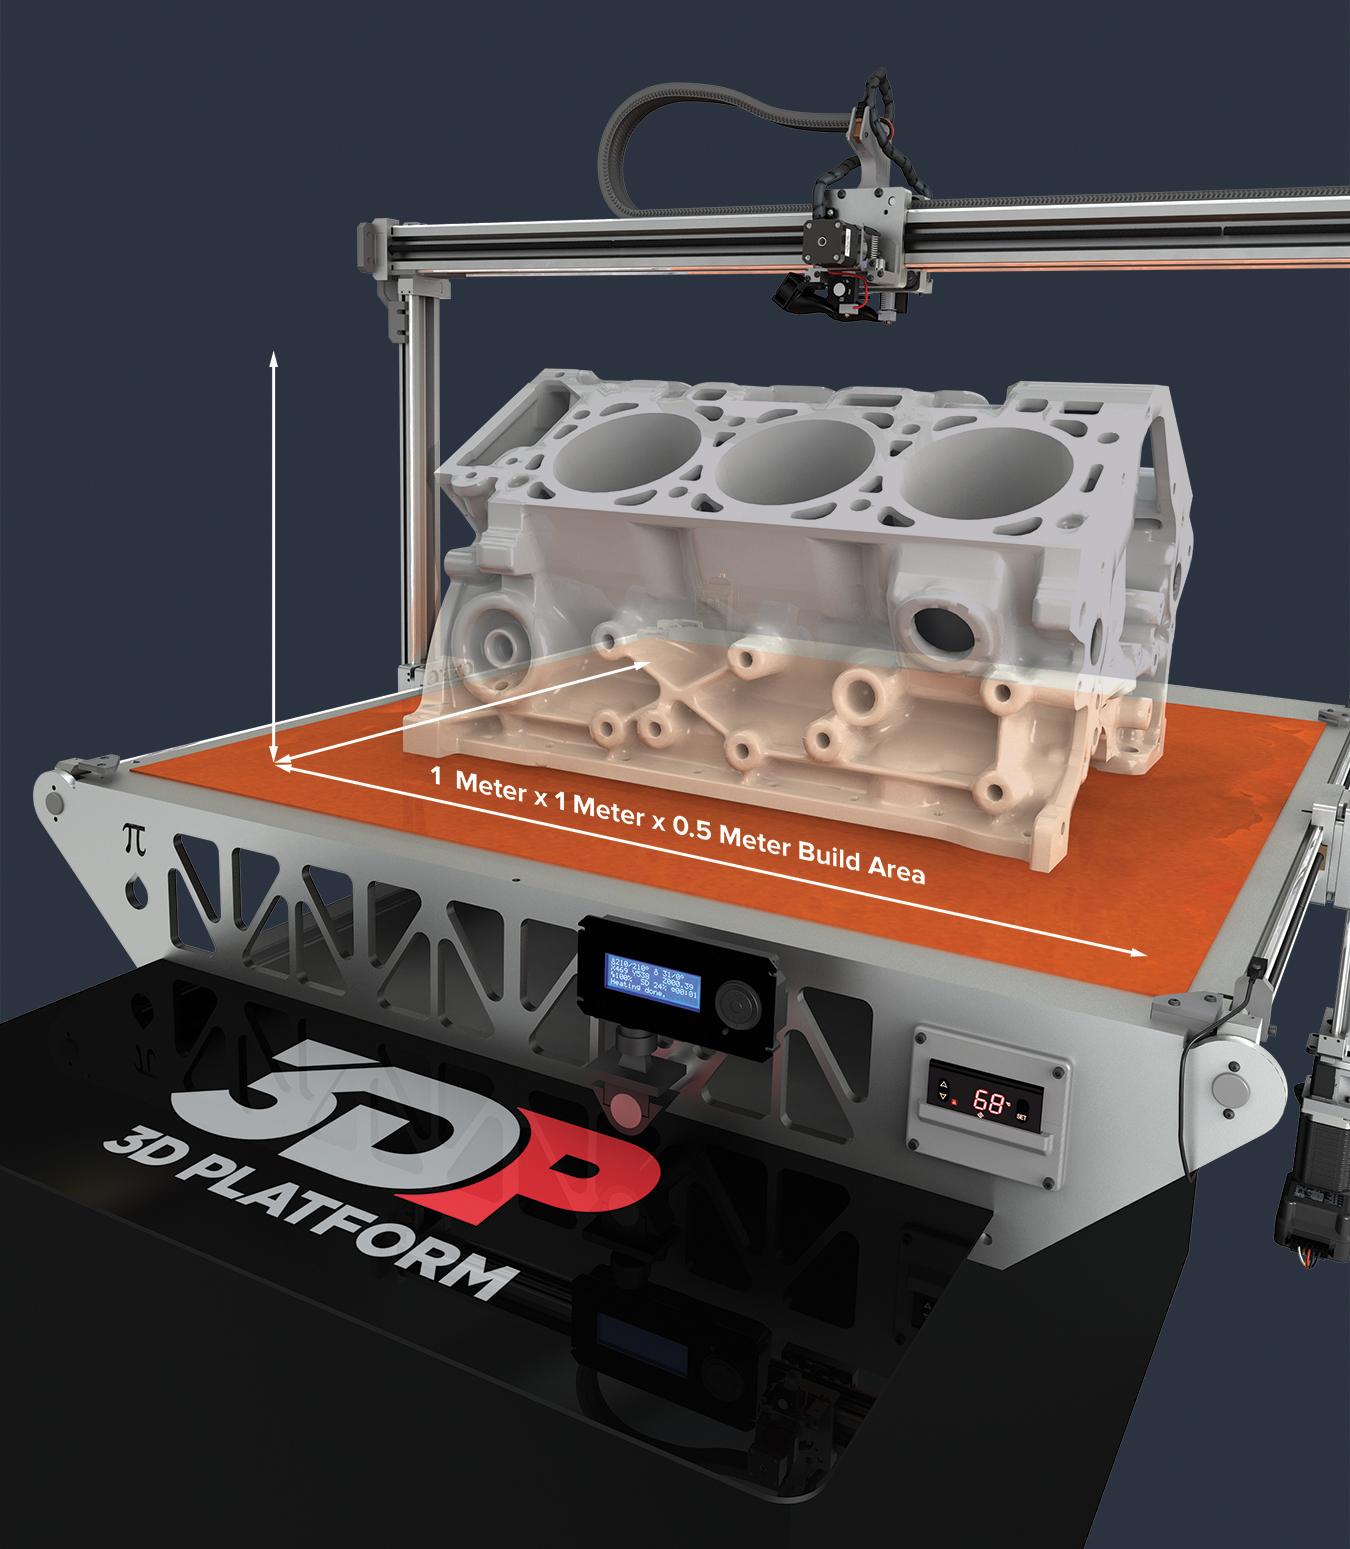 3dp Unlimited Becomes 3d Platform Offering Engineers And Designers